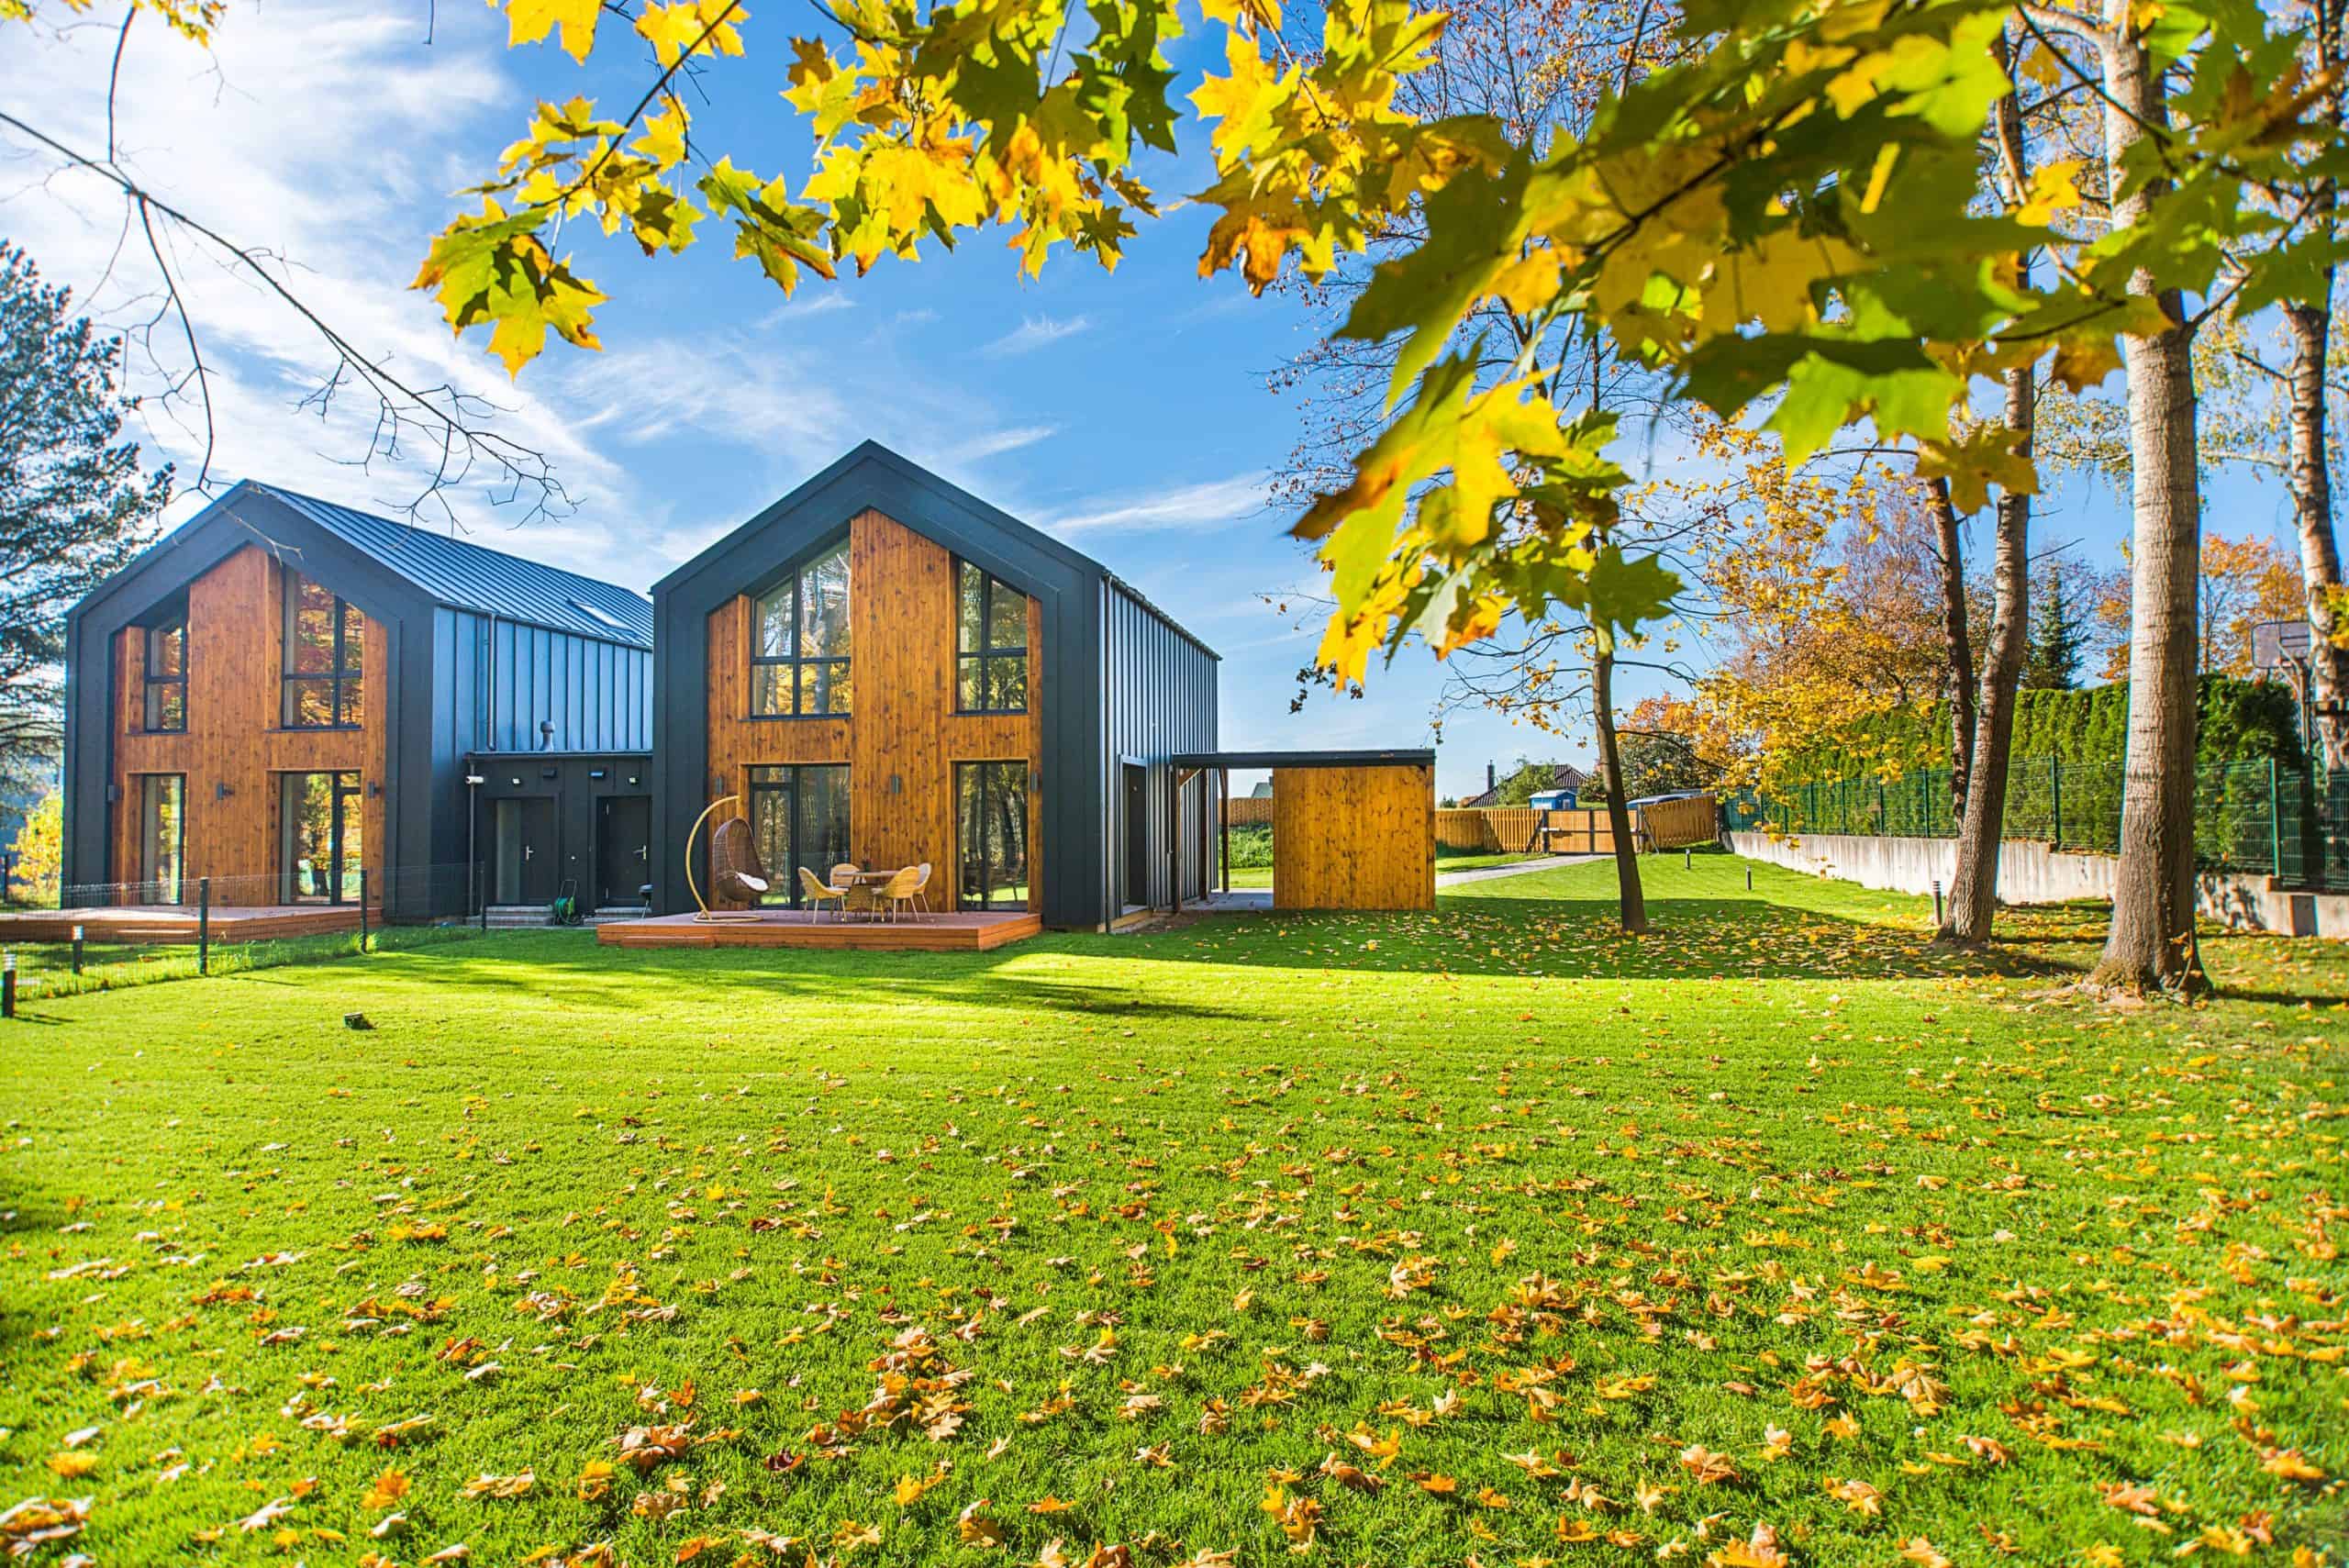 Modern twin-gabled houses with expansive glass windows nestled among vibrant autumn foliage under a clear blue sky.